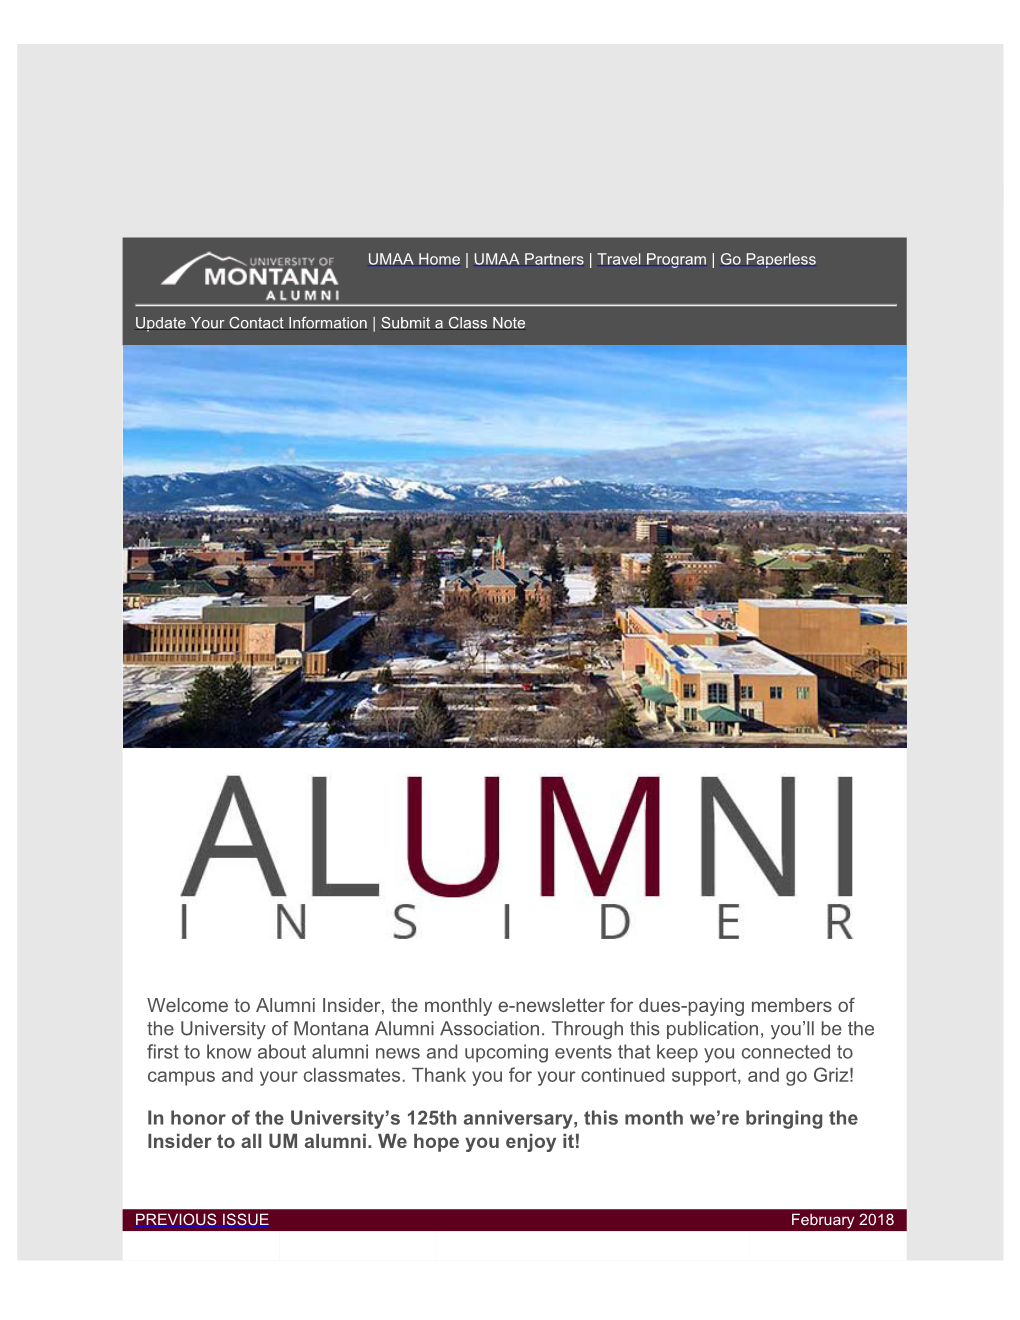 Alumni Insider, the Monthly E-Newsletter for Dues-Paying Members of the University of Montana Alumni Association